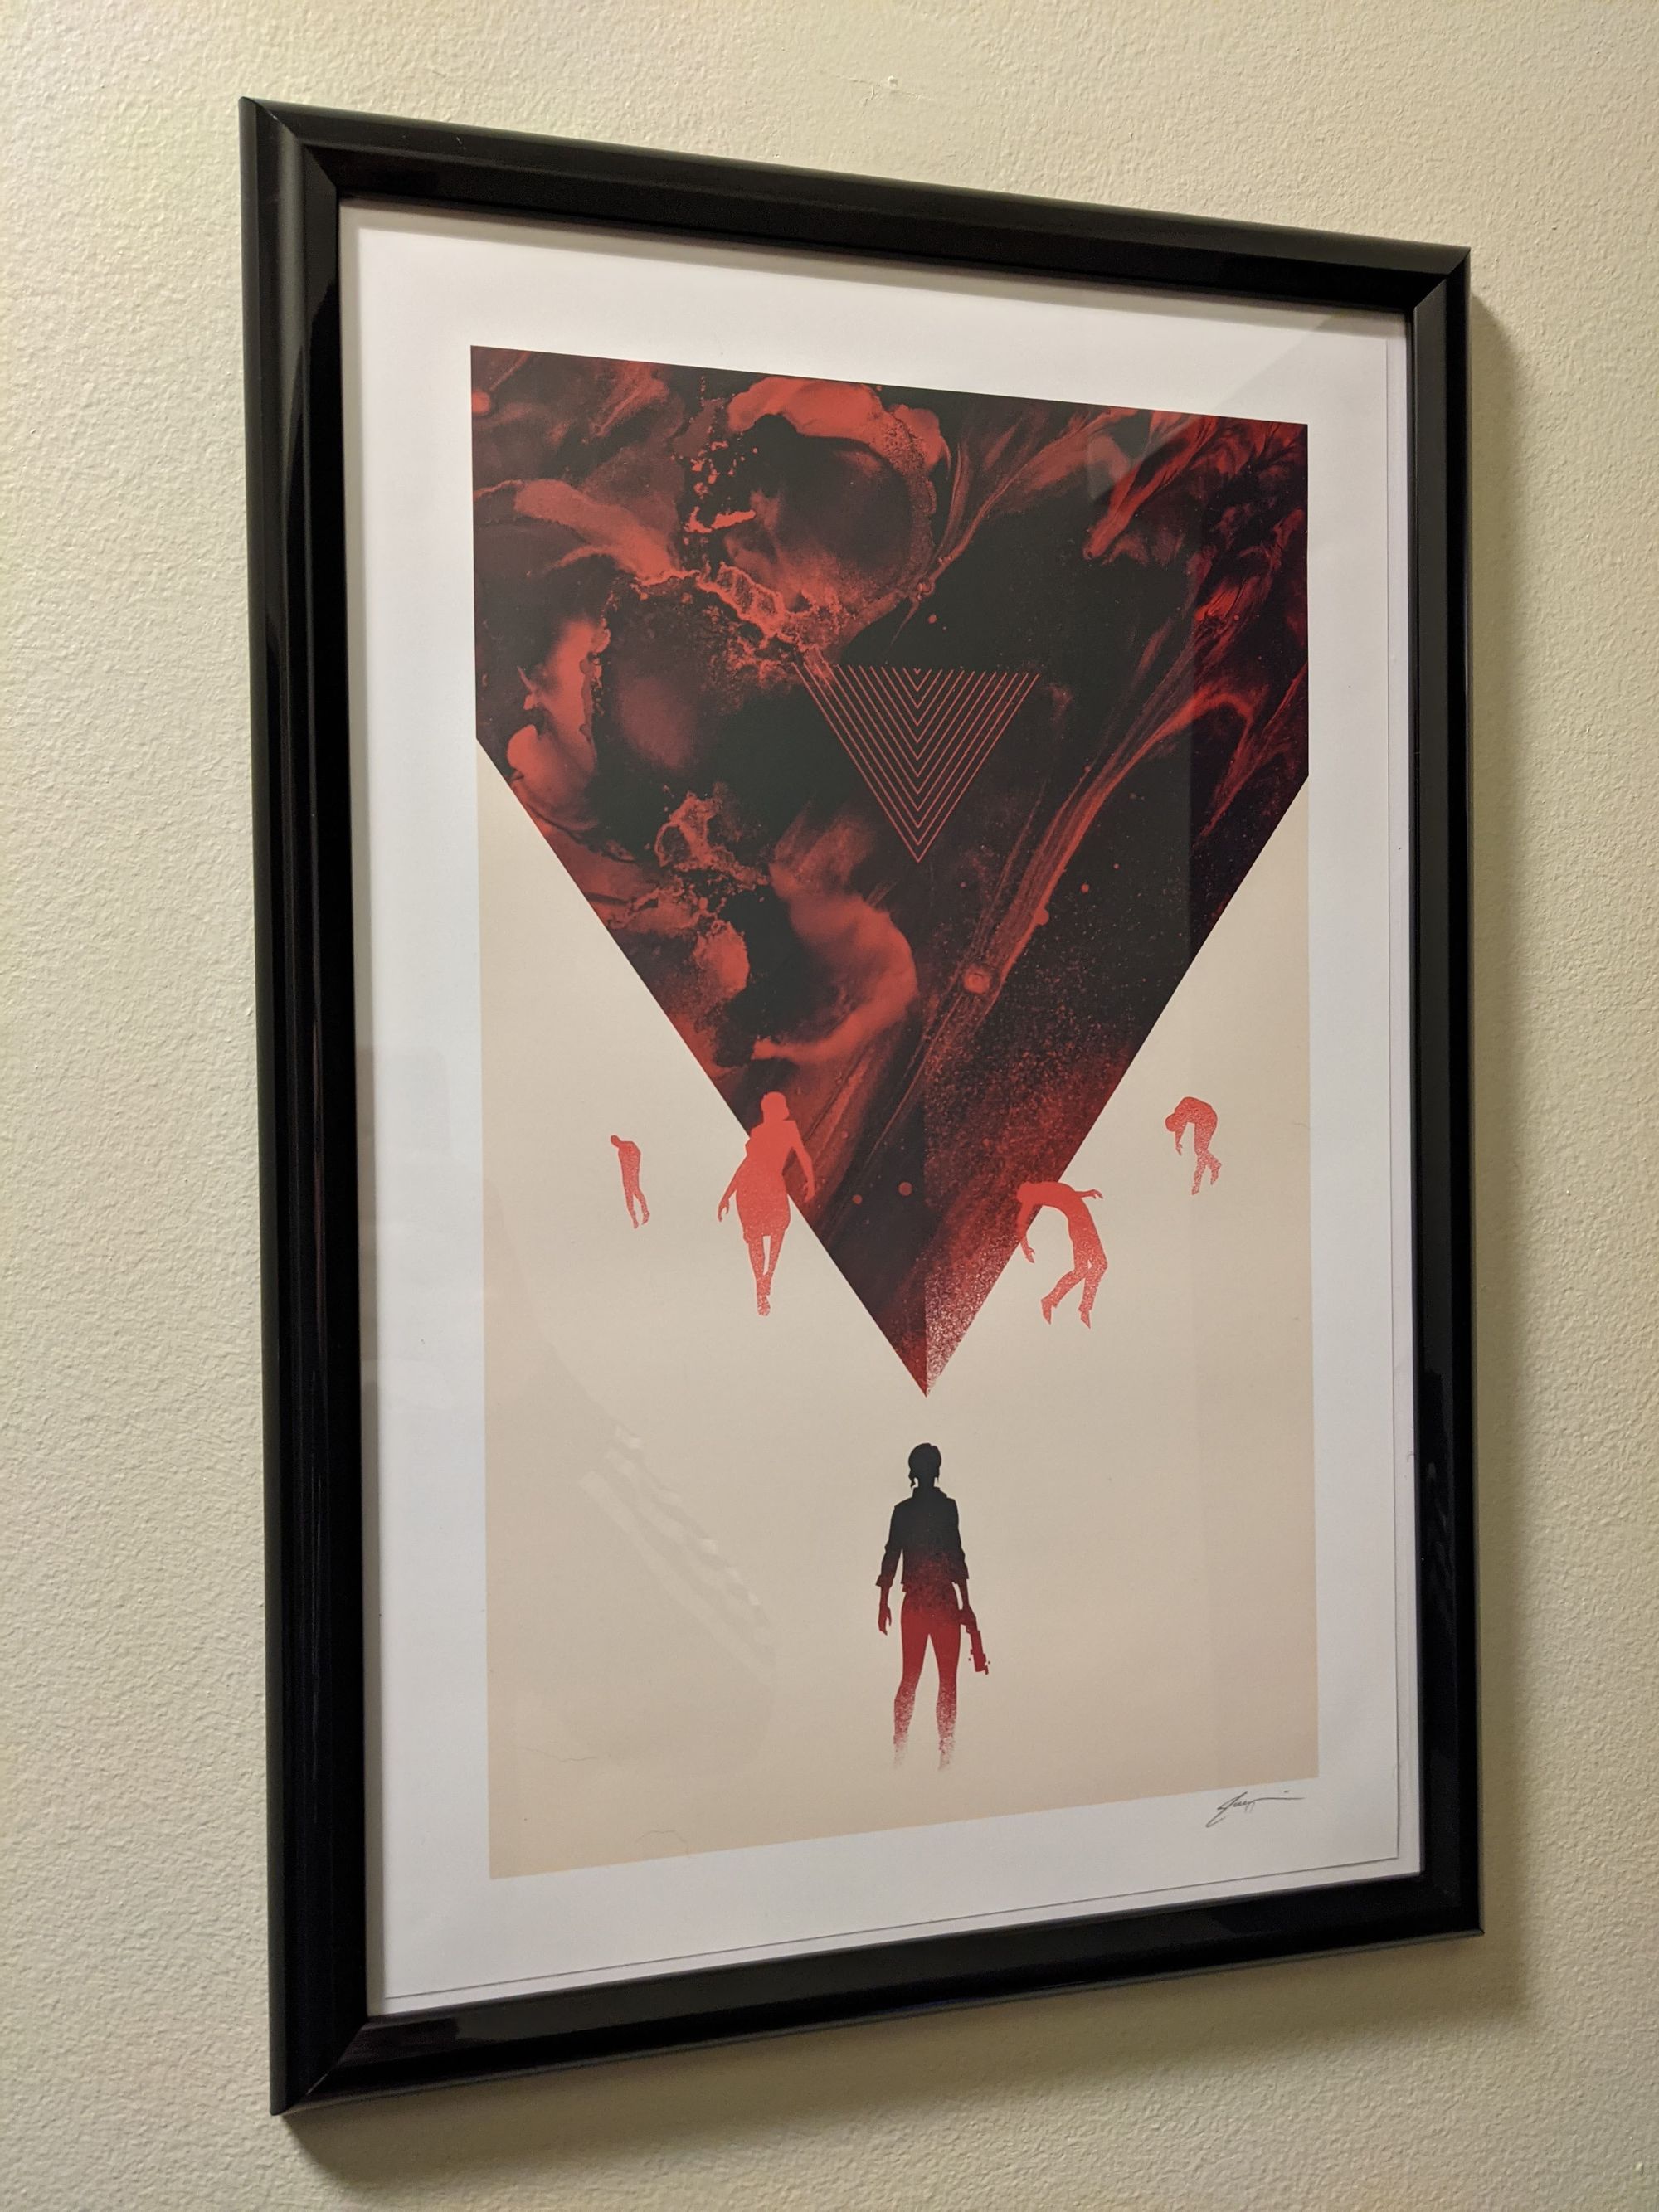 A Control print inside a simple black frame. There is a silhouette of the protagonist underneath an upside down red triangle. There are silhouettes of floating bodies around the triangle above.